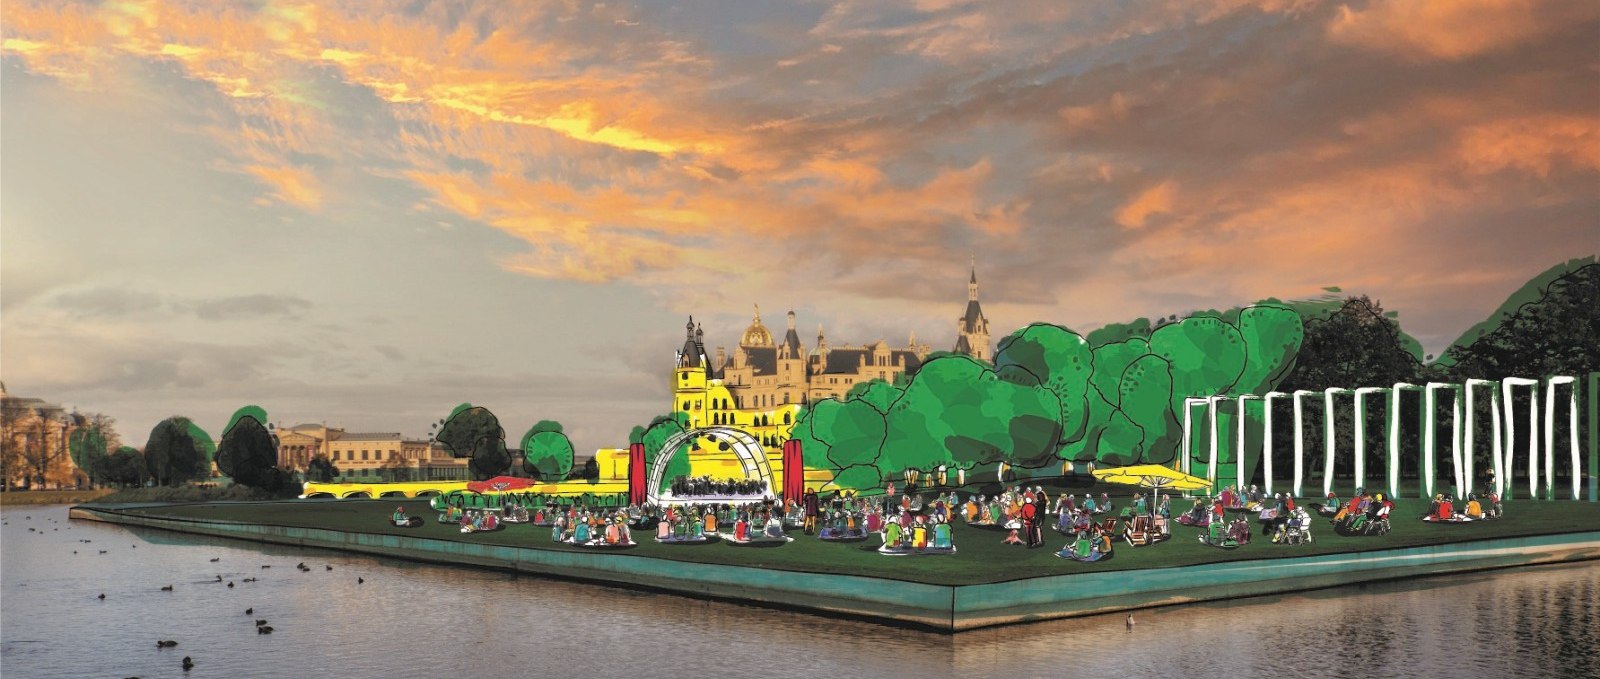 A visualization of the Castle Festival on the Floating Meadow in Schwerin within sight of Schwerin Castle., © Mecklenburgisches Staatstheater